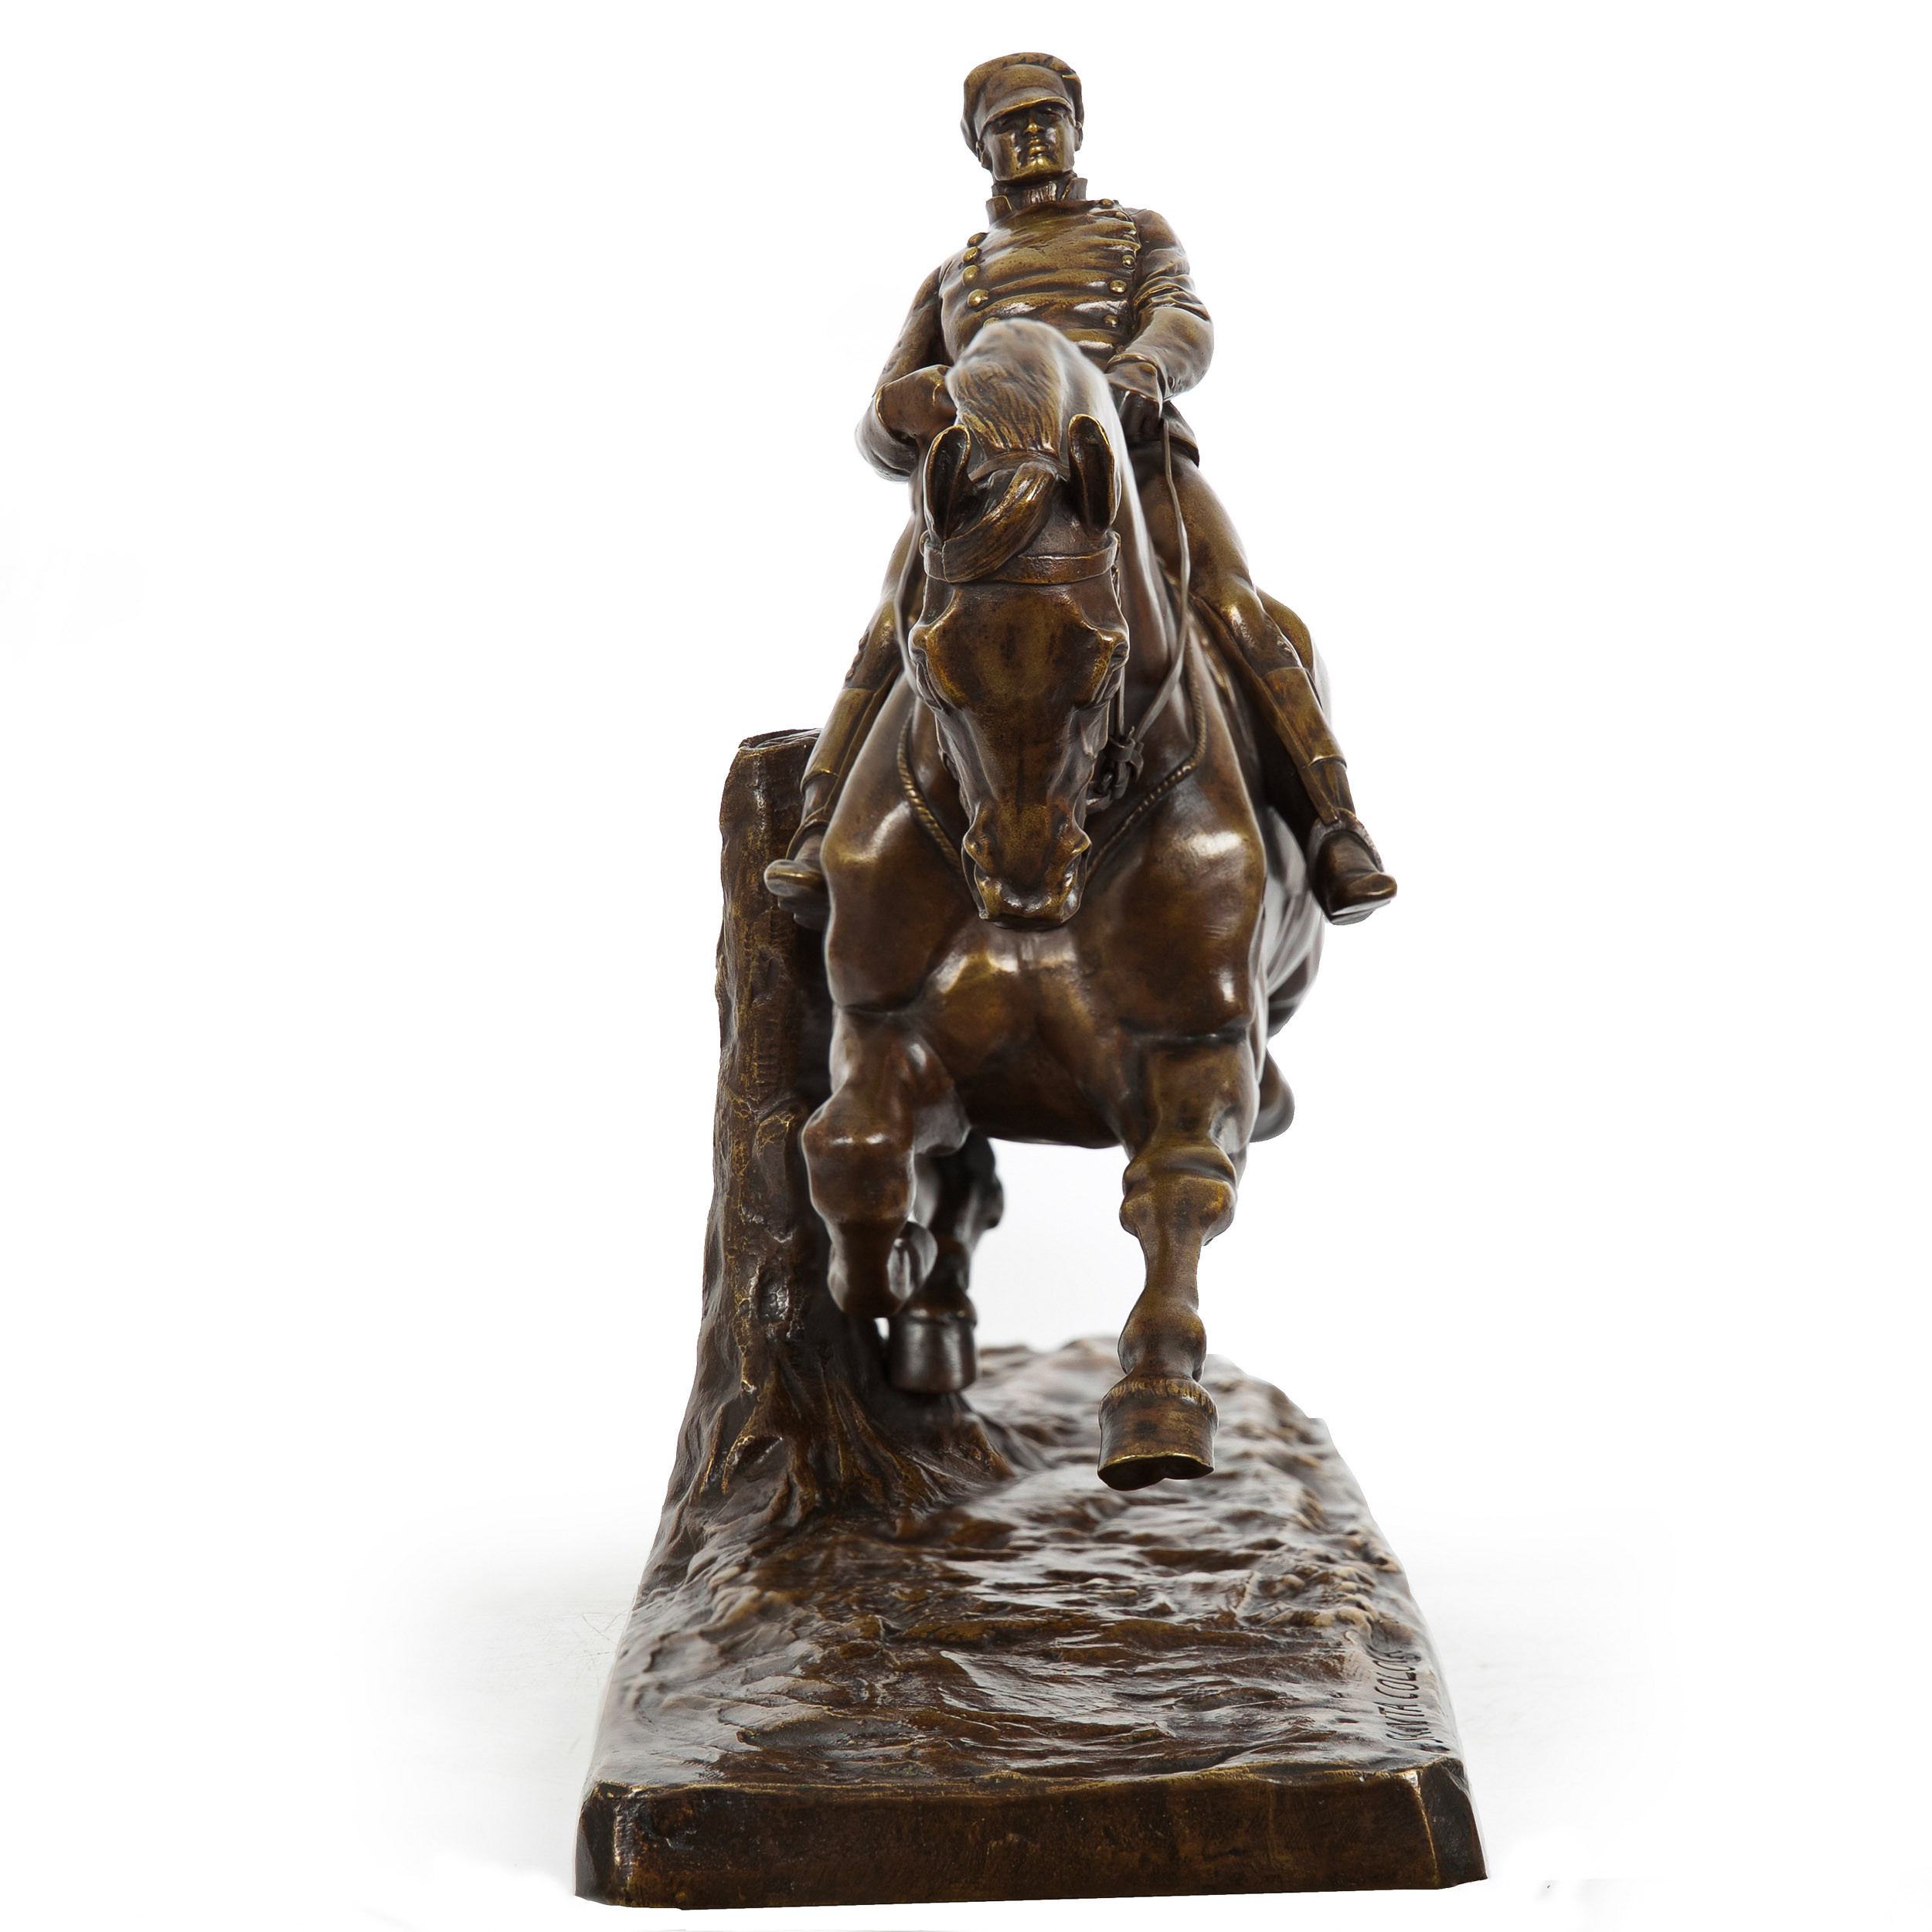 Horse And Rider Sculpture